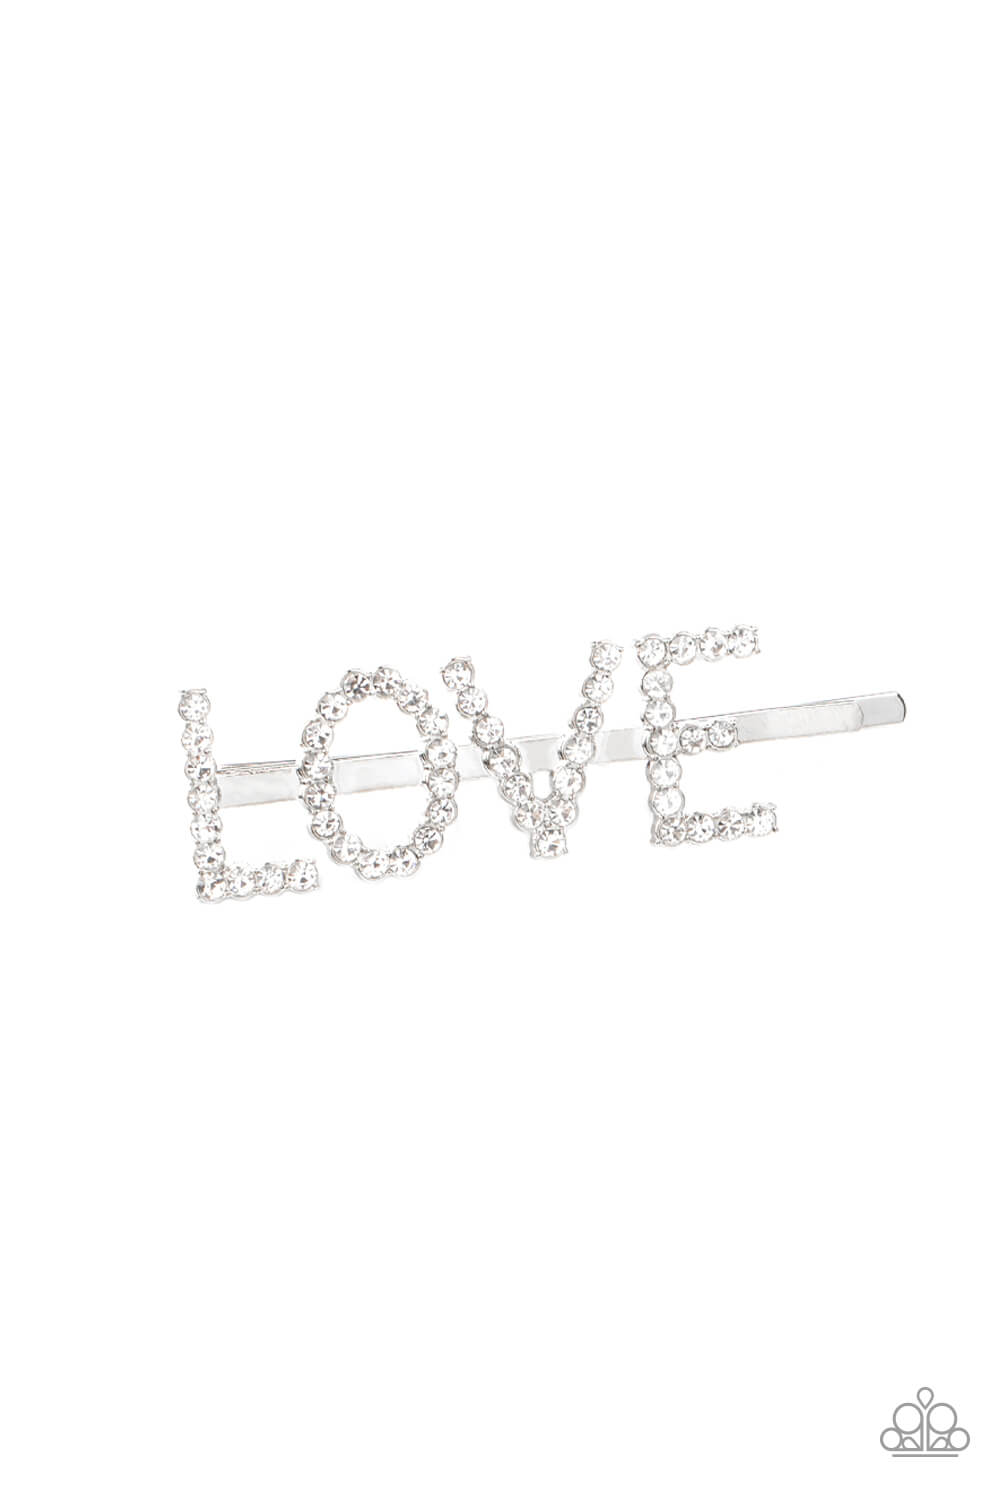 All You Need Is Love - White Bling Hair Clip - Princess Glam Shop